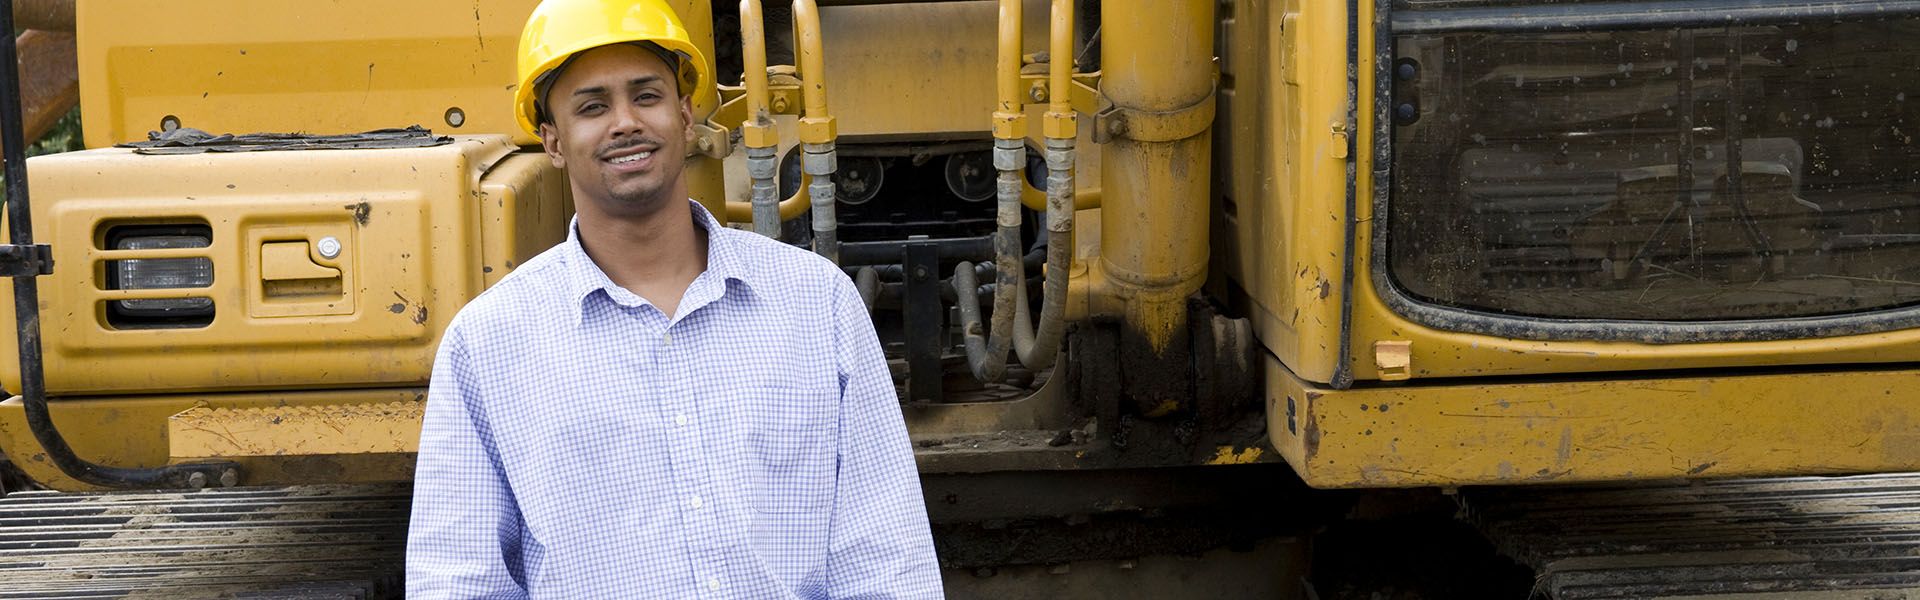 A heavy equipment operator smiles on site of his highway construction career in Georgia